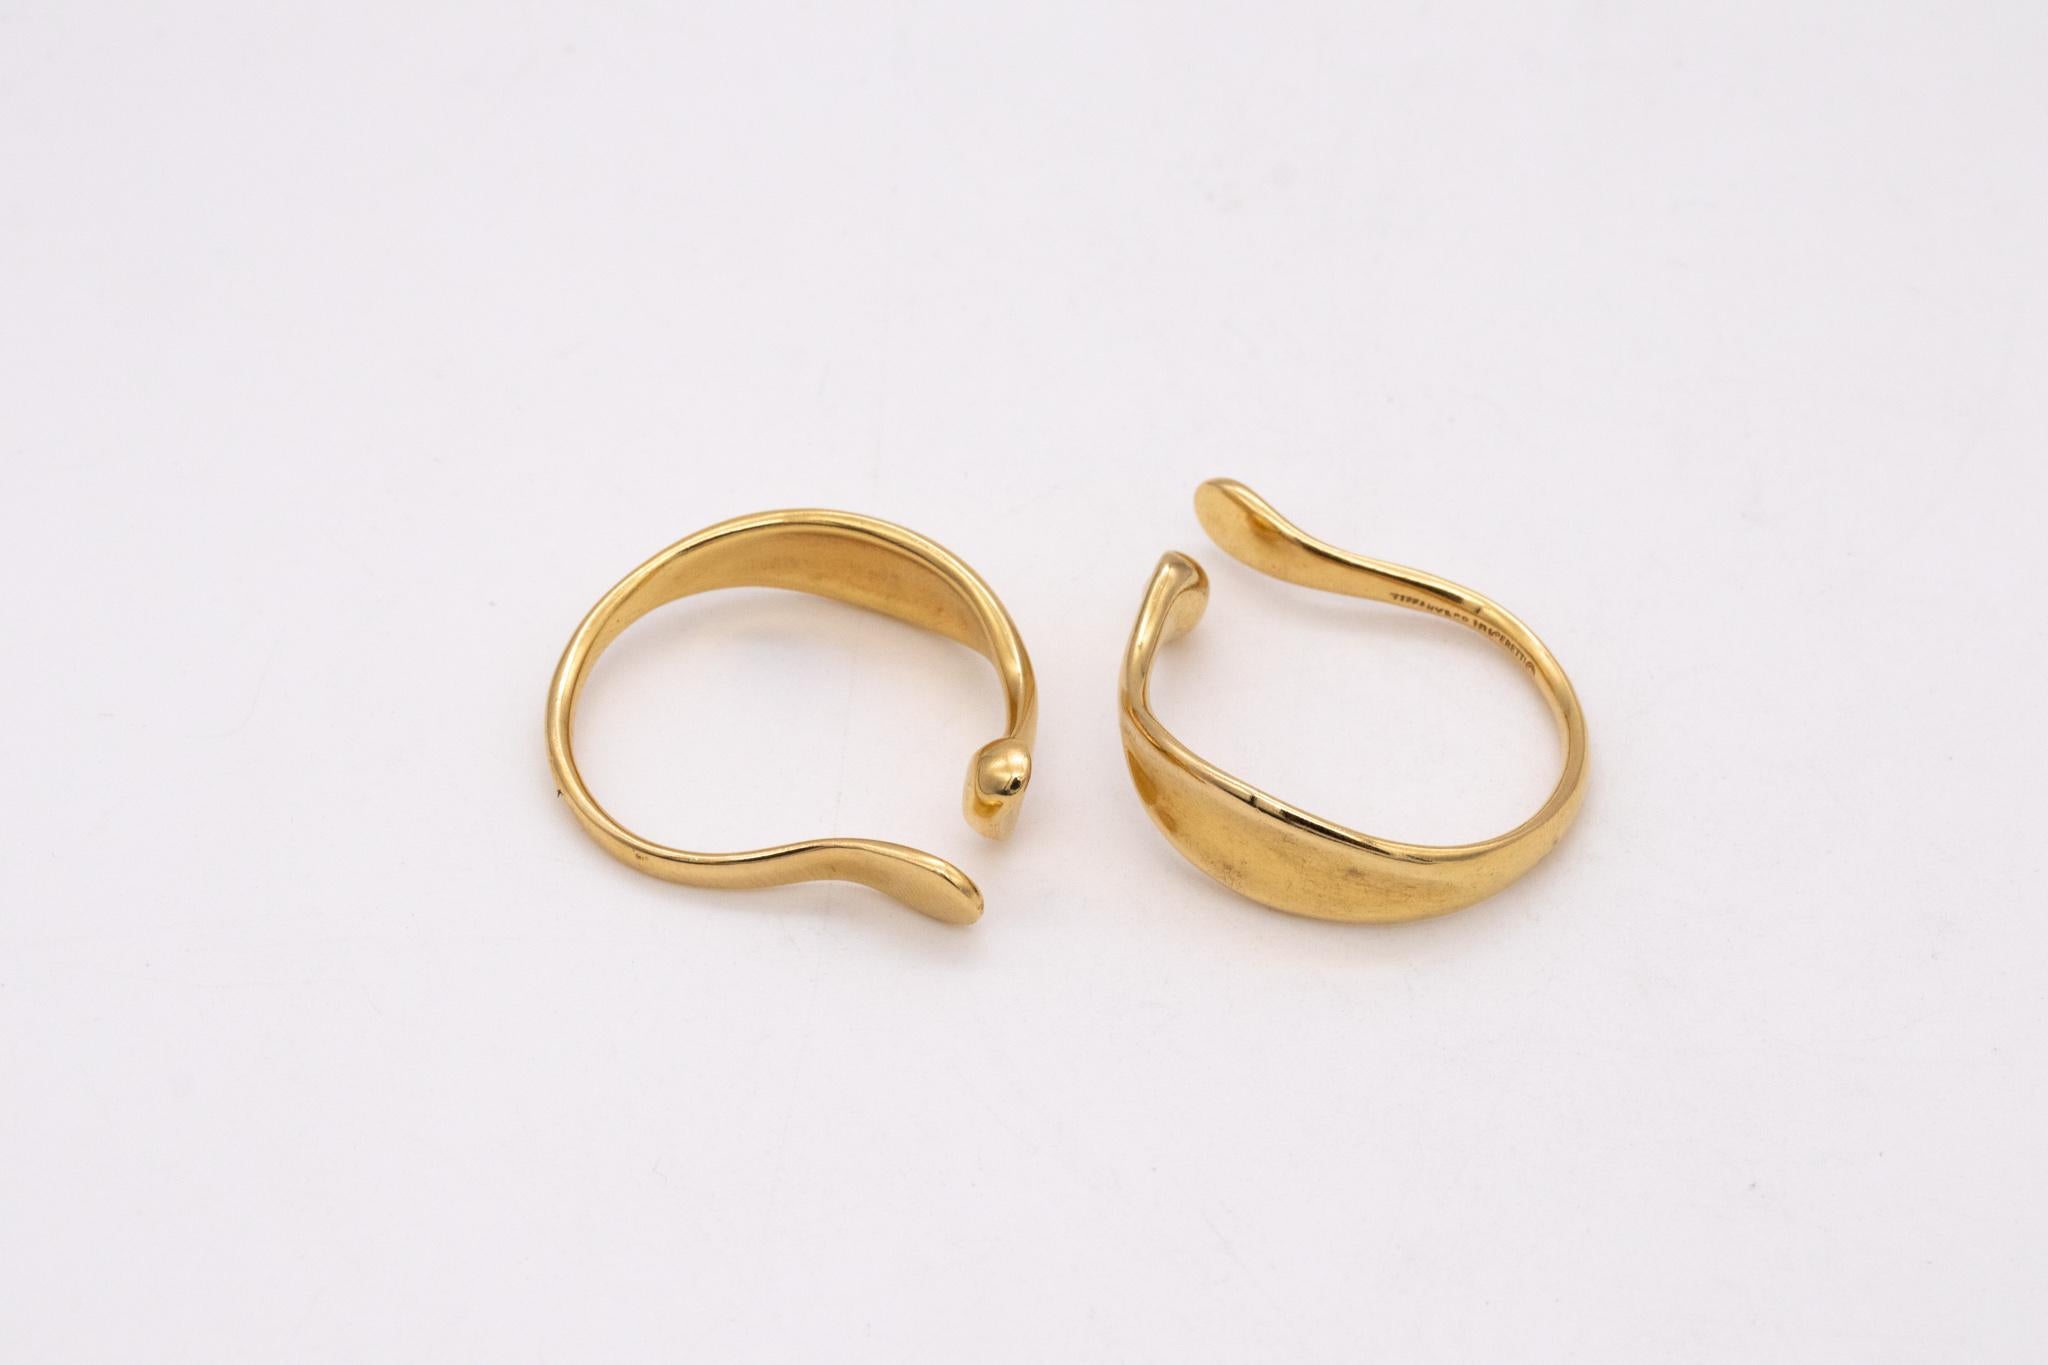 Modernist Tiffany & Co. 1984 by Elsa Peretti Rare Lilies Hoops Earrings in Solid 18Kt Gold